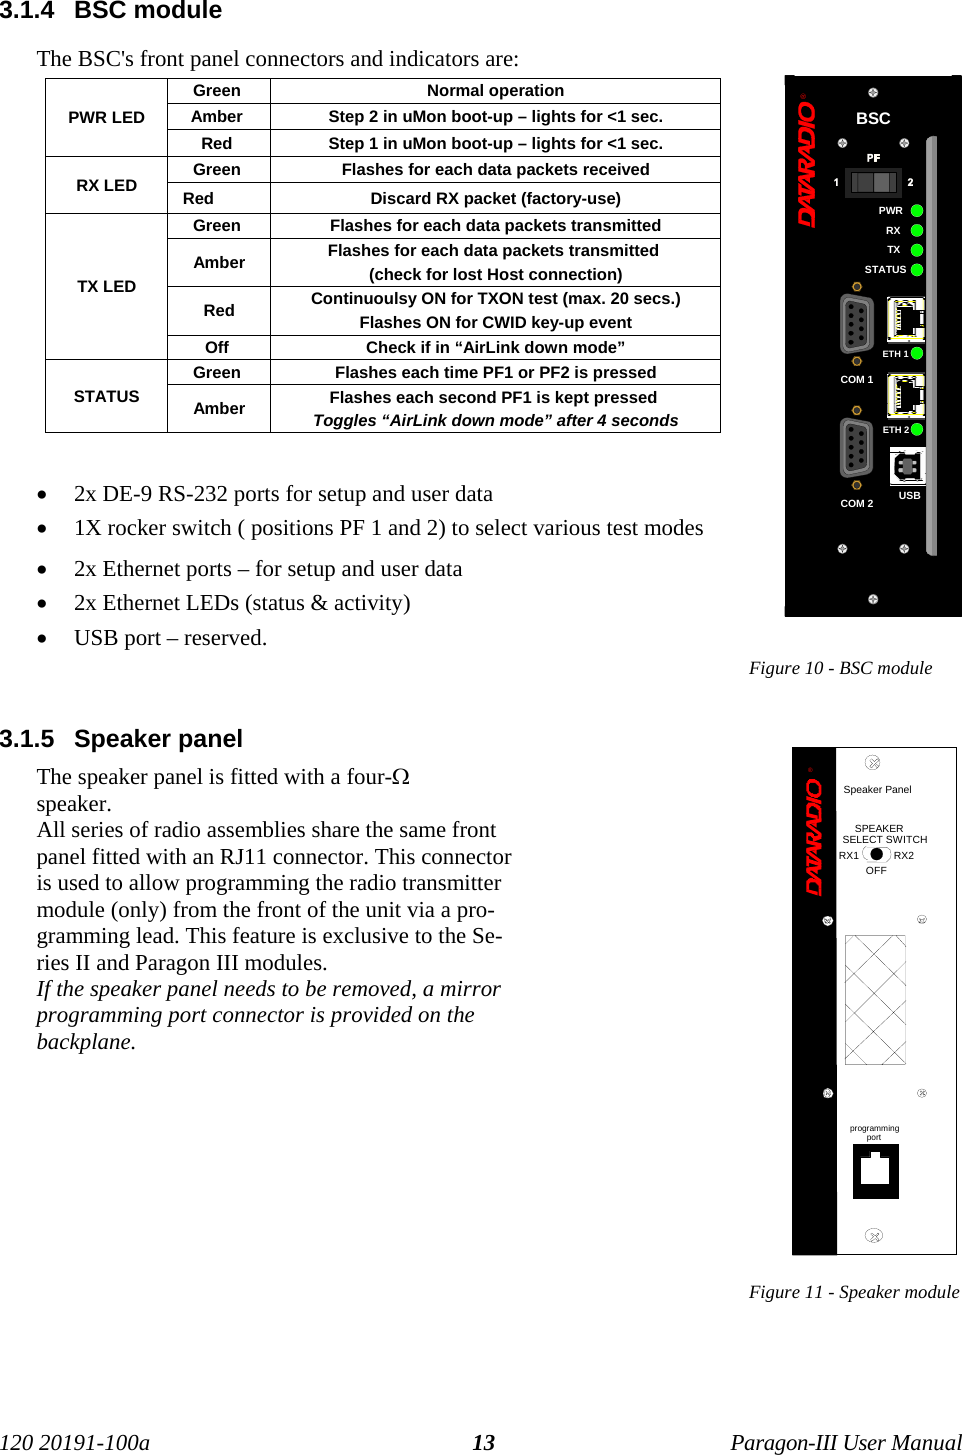 120 20191-100a Paragon-III User Manual133.1.4  BSC moduleThe BSC&apos;s front panel connectors and indicators are:Green  Normal operationAmber  Step 2 in uMon boot-up – lights for &lt;1 sec.PWR LEDRed  Step 1 in uMon boot-up – lights for &lt;1 sec.Green  Flashes for each data packets receivedRX LED Red          Discard RX packet (factory-use)Green  Flashes for each data packets transmittedAmber Flashes for each data packets transmitted (check for lost Host connection)Red Continuoulsy ON for TXON test (max. 20 secs.)Flashes ON for CWID key-up eventTX LEDOff  Check if in “AirLink down mode”Green  Flashes each time PF1 or PF2 is pressedSTATUS Amber Flashes each second PF1 is kept pressed Toggles “AirLink down mode” after 4 seconds• 2x DE-9 RS-232 ports for setup and user data• 1X rocker switch ( positions PF 1 and 2) to select various test modes• 2x Ethernet ports – for setup and user data• 2x Ethernet LEDs (status &amp; activity) • USB port – reserved. Figure 10 - BSC module3.1.5  Speaker panelThe speaker panel is fitted with a four-Ωspeaker. All series of radio assemblies share the same frontpanel fitted with an RJ11 connector. This connectoris used to allow programming the radio transmittermodule (only) from the front of the unit via a pro-gramming lead. This feature is exclusive to the Se-ries II and Paragon III modules. If the speaker panel needs to be removed, a mirrorprogramming port connector is provided on thebackplane.Figure 11 - Speaker module®Speaker PanelprogrammingportRX2RX1OFFSPEAKERSELECT SWITCH®PWRTXBSCETH 2RXUSBETH 1COM 2COM 1STATUS